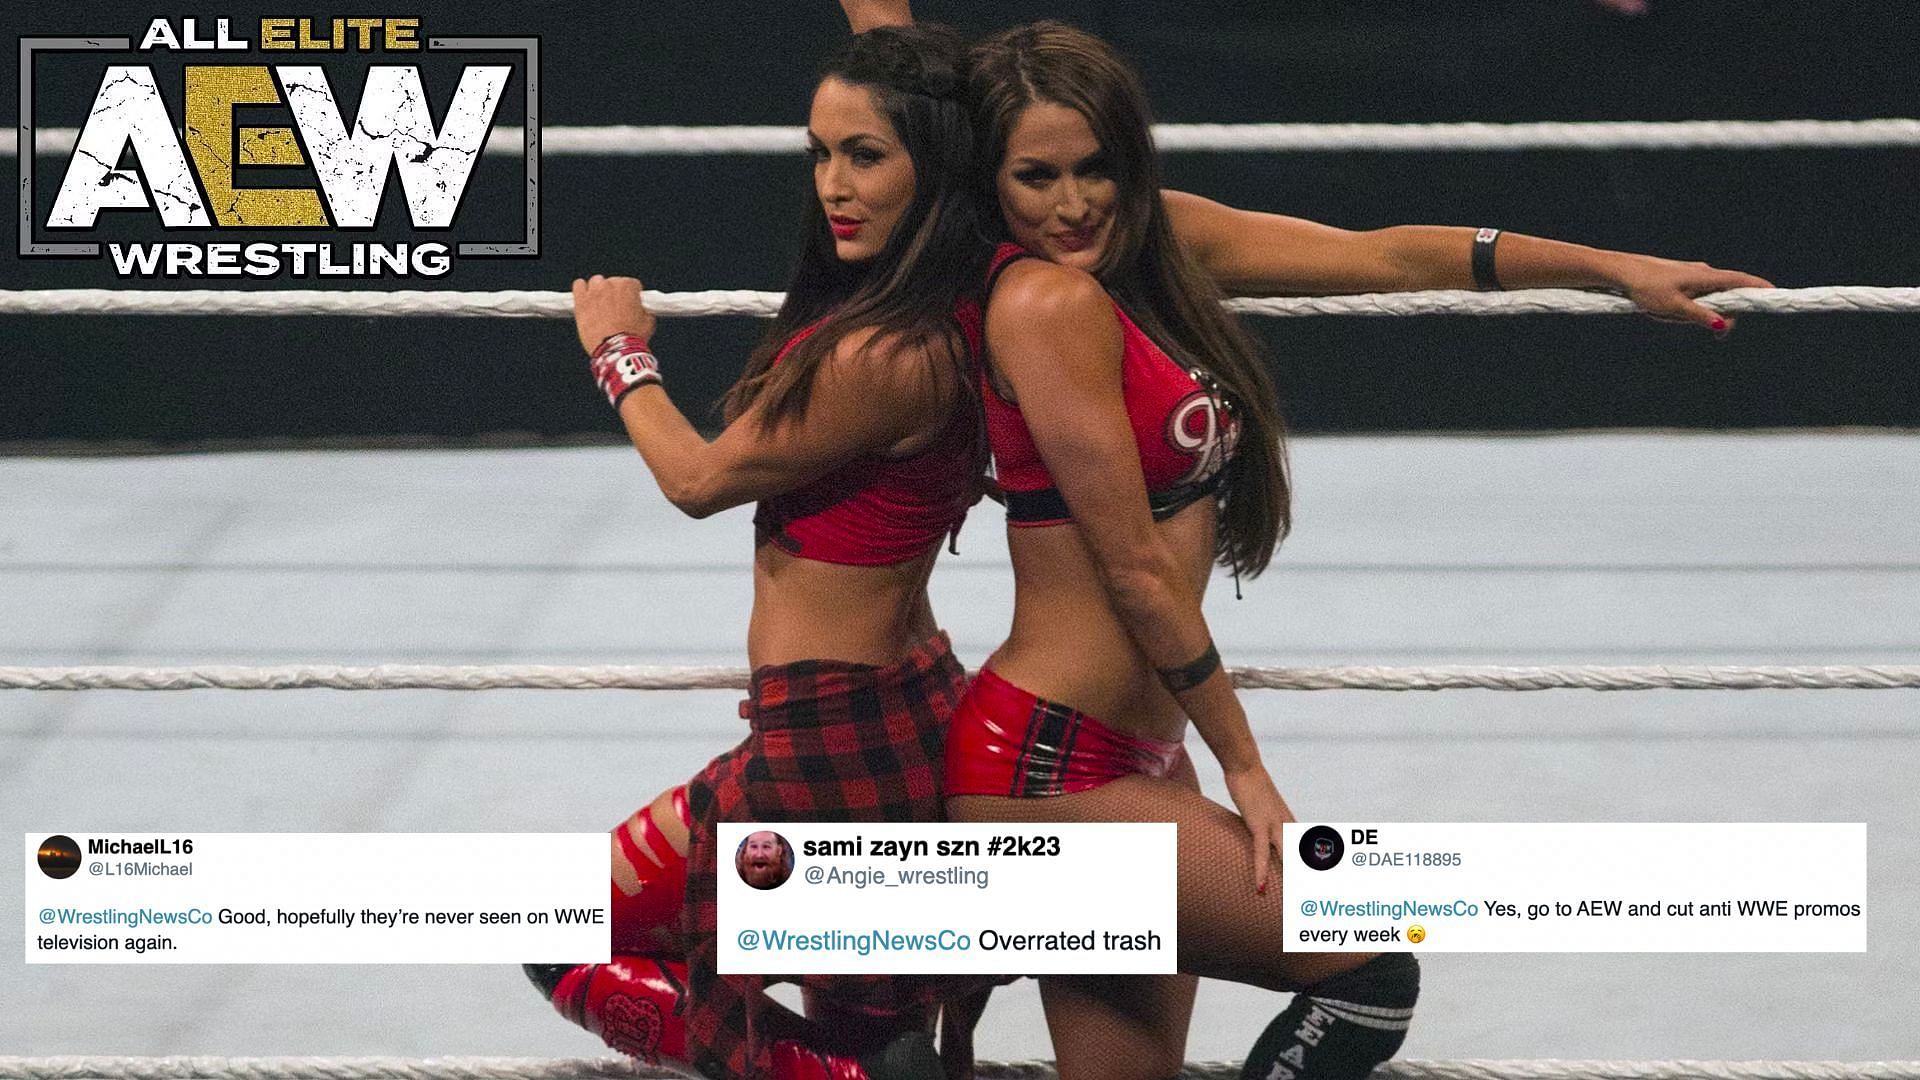 The Bella Twins are WWE legends